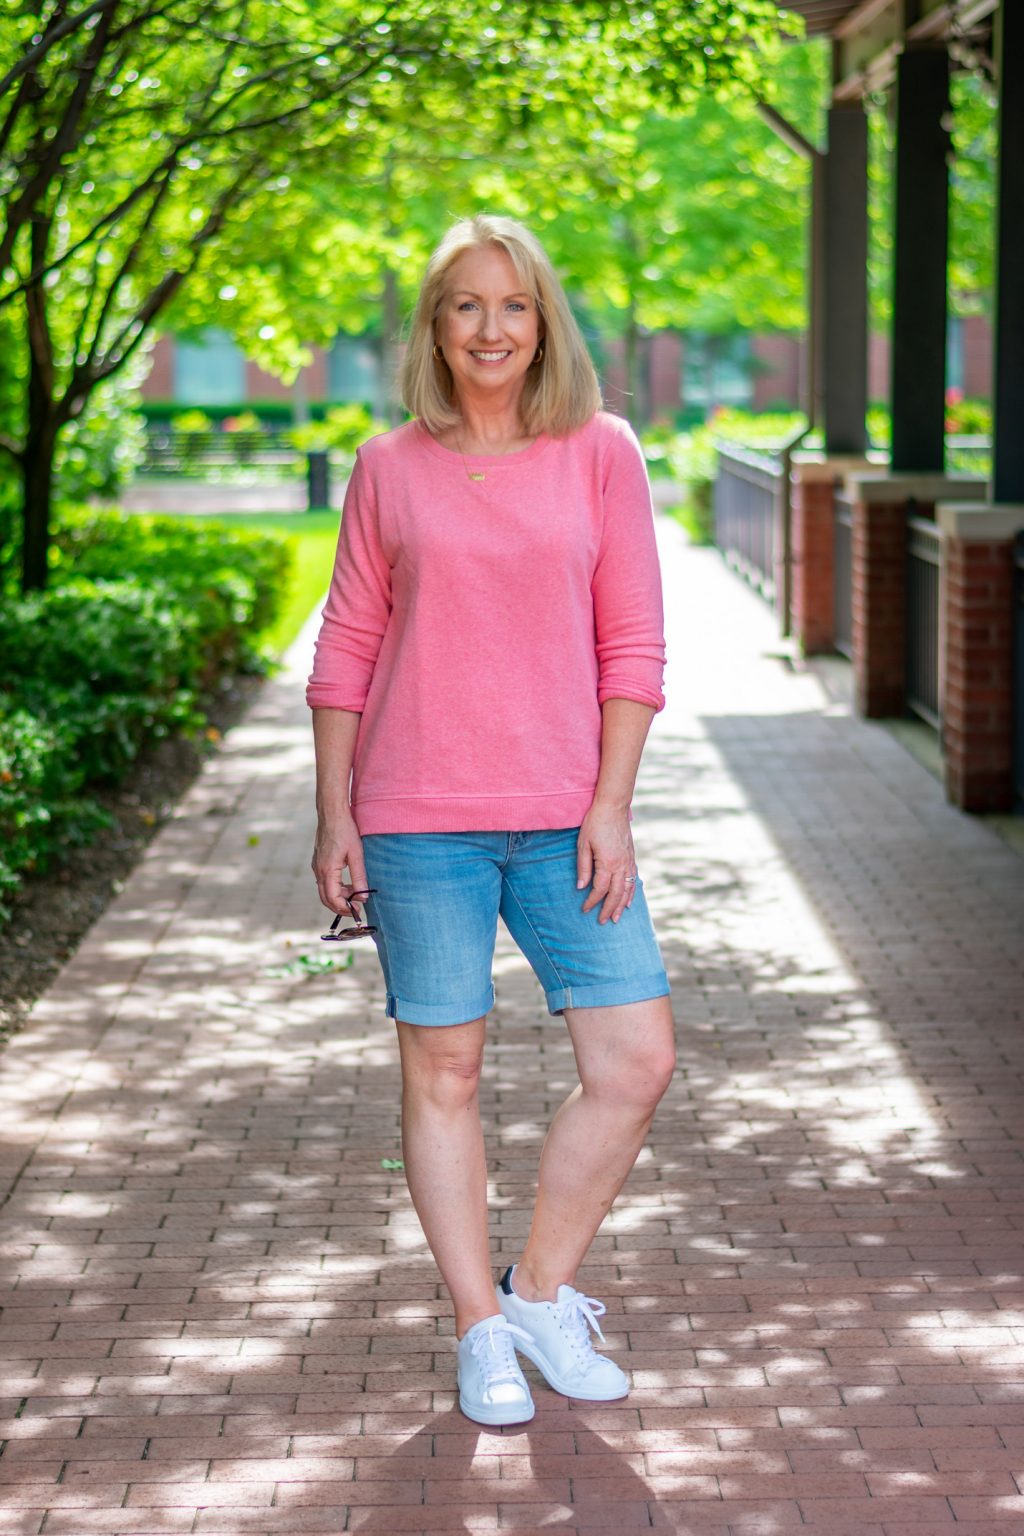 Summer Sweatshirt for Chilly Moments - Dressed for My Day